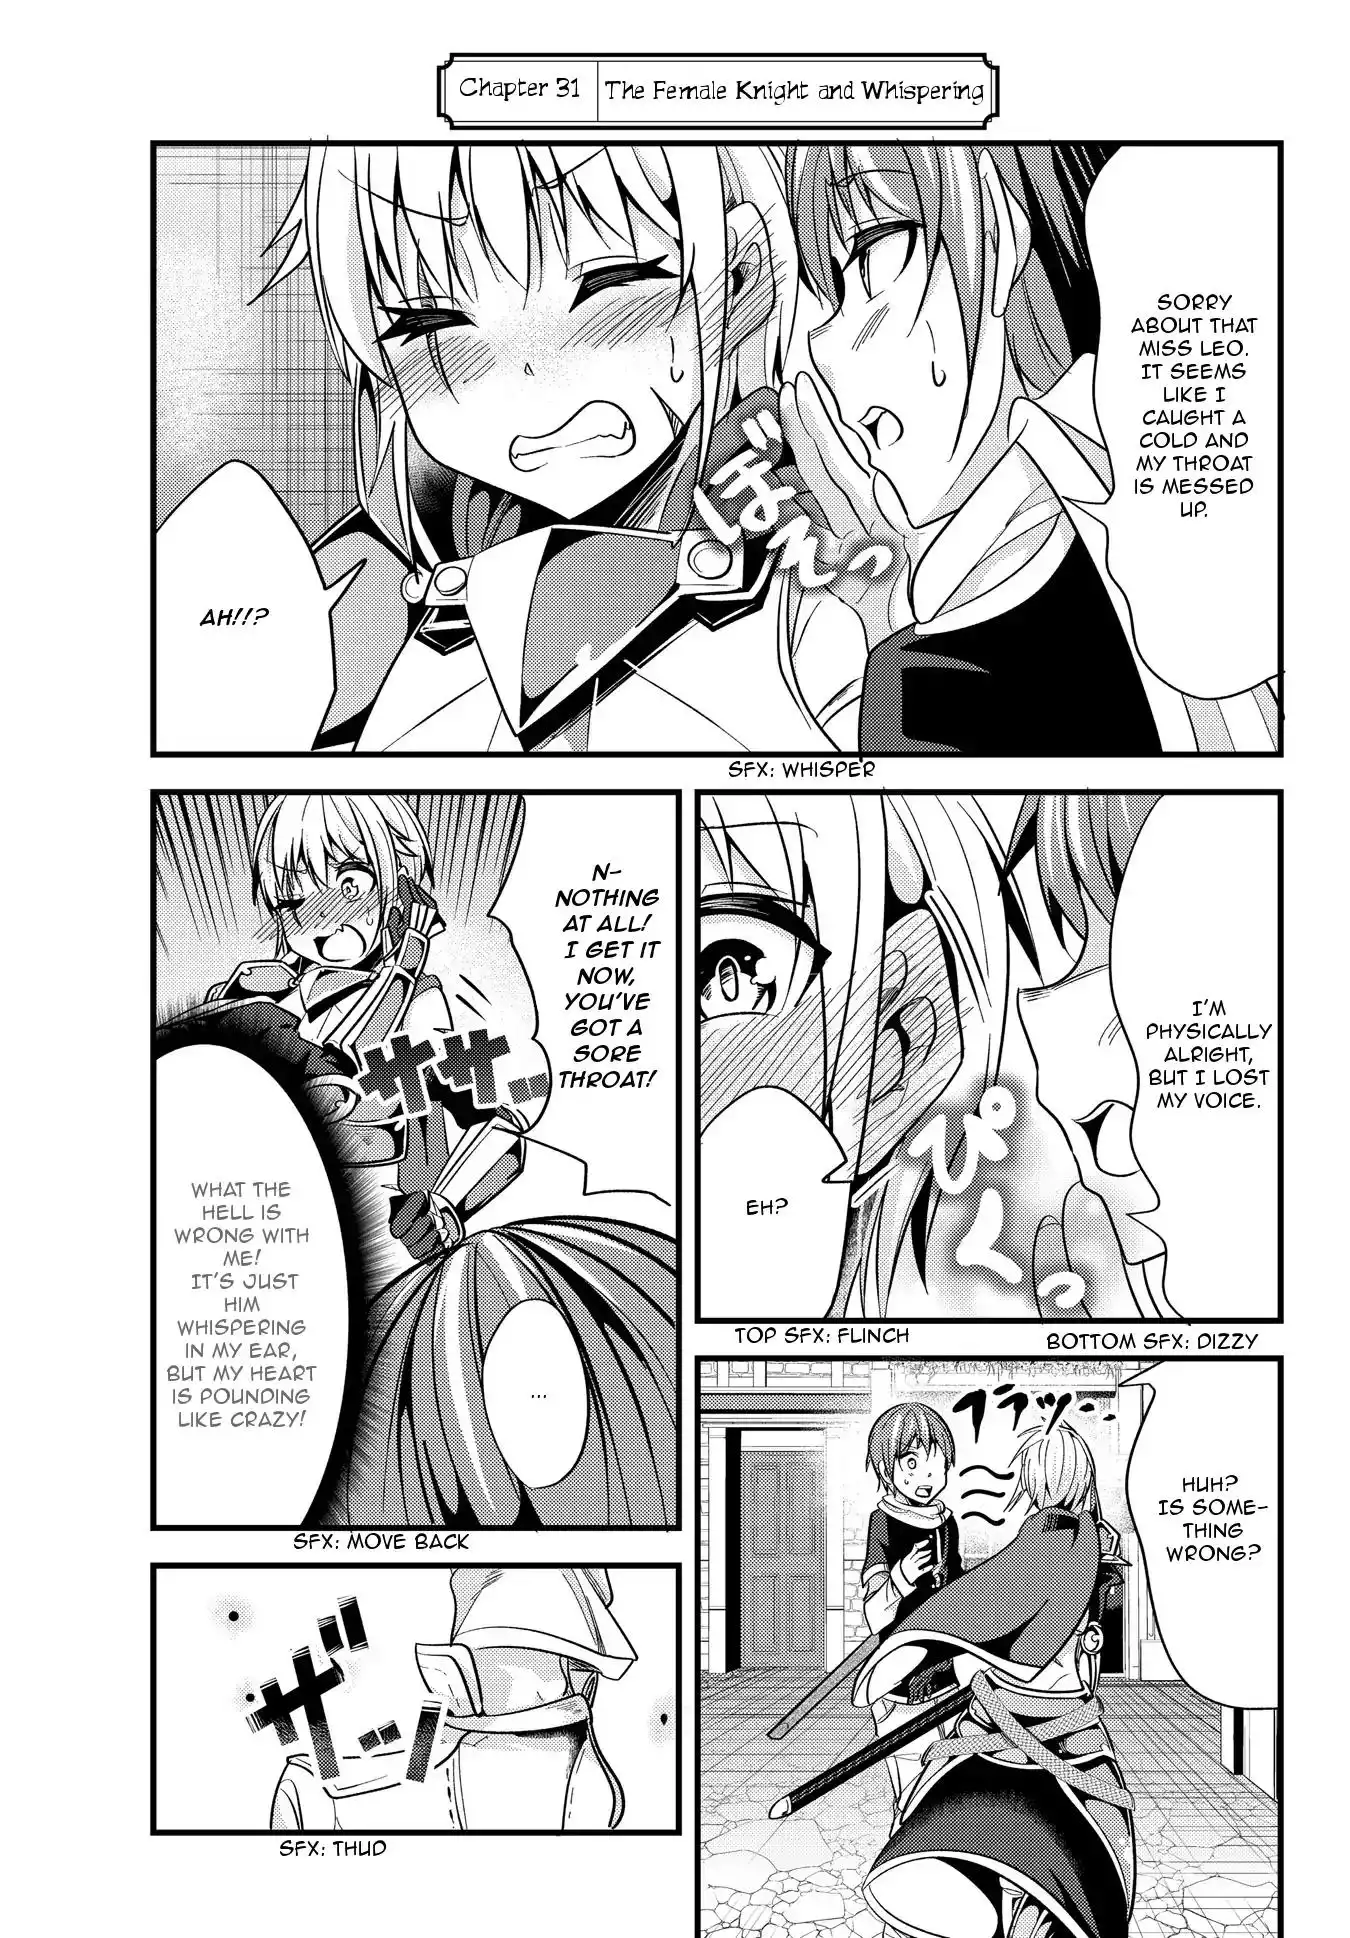 A Story About Treating a Female Knight, Who Has Never Been Treated as a Woman, as a Woman - Chapter 31 Page 3